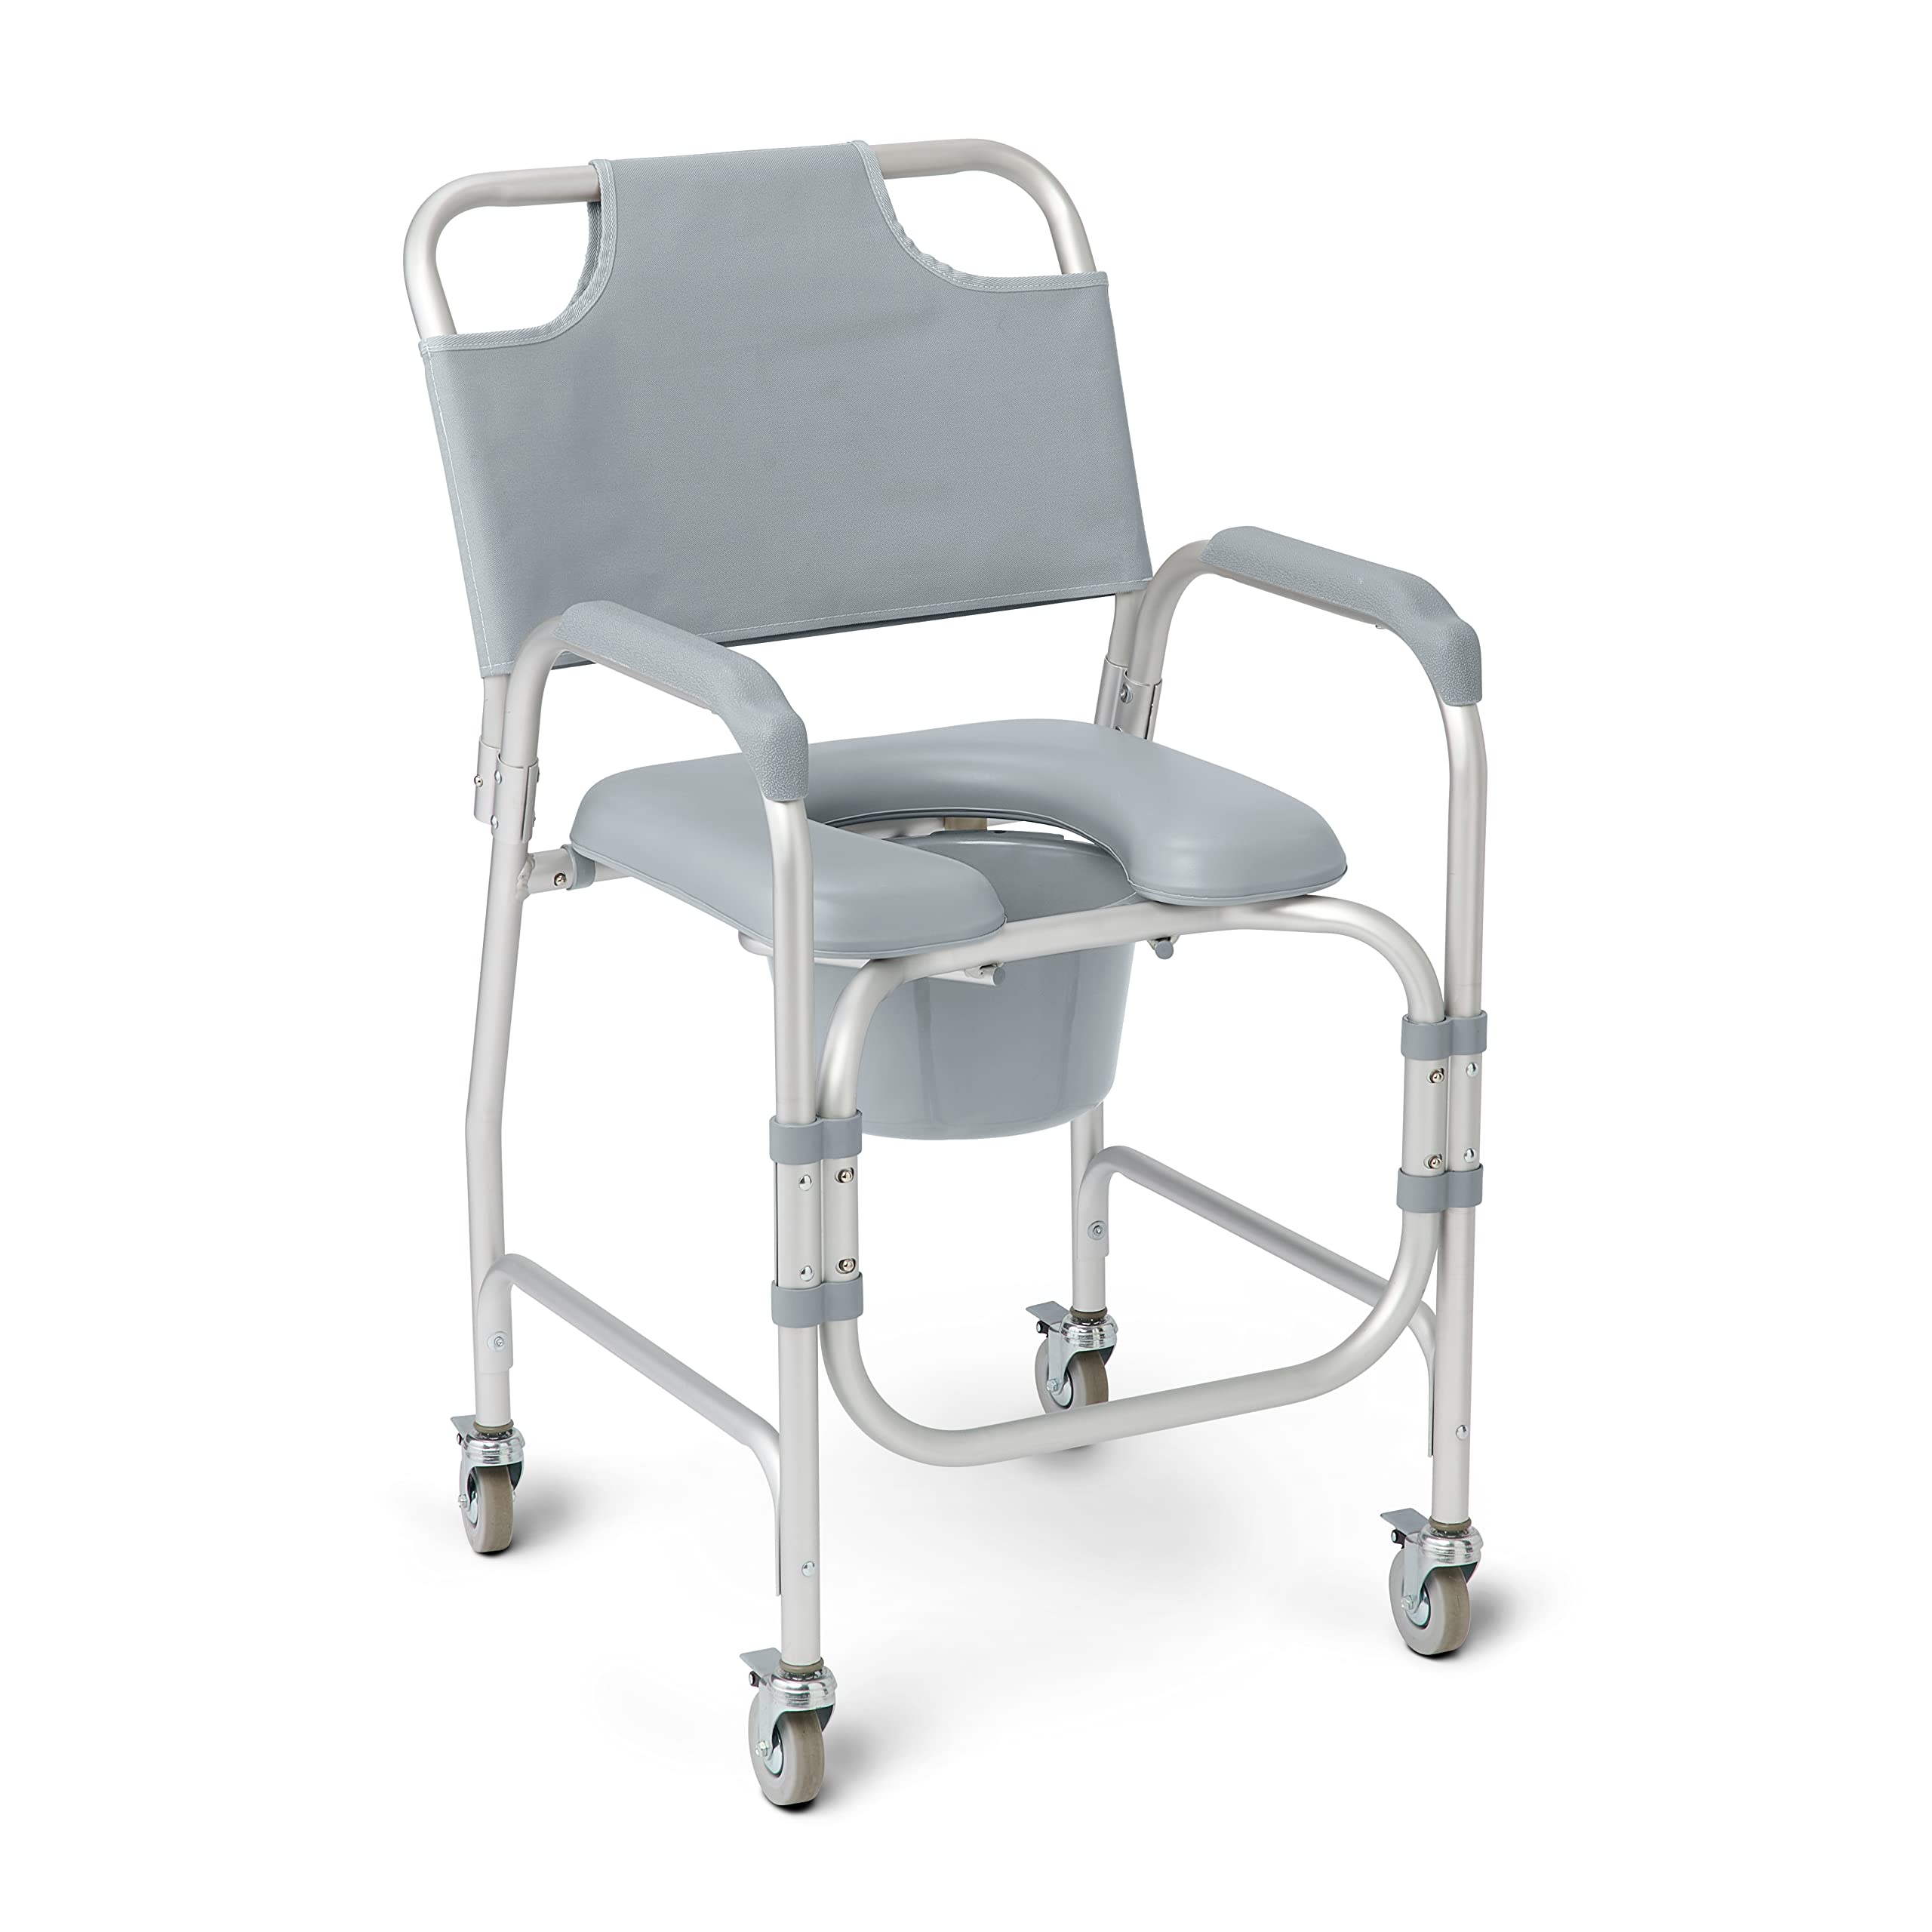 Medline Aluminum Padded Shower Chair Commode with 4 Locking Casters, 300 lbs. Capacity — for Restroom, Bathroom & Wheelchair Transfer to Toilet, 1 Ct.,Gray